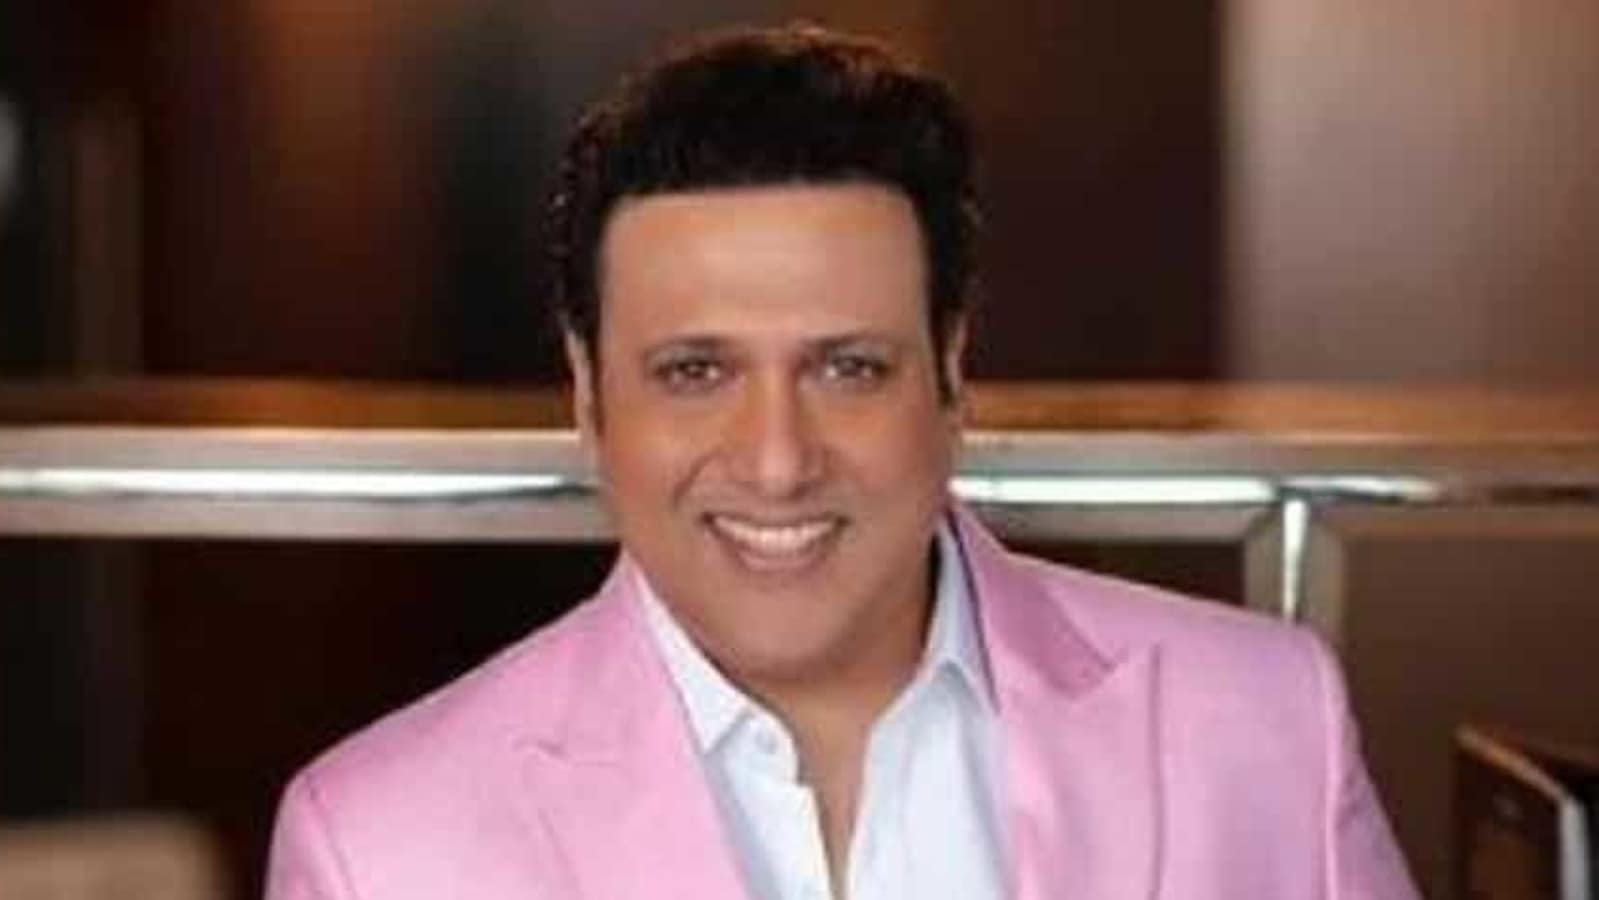 Govinda Sex Videos - Govinda says he's no longer 'pious', has been corrupted: 'Now I party,  smoke, drink' | Bollywood - Hindustan Times